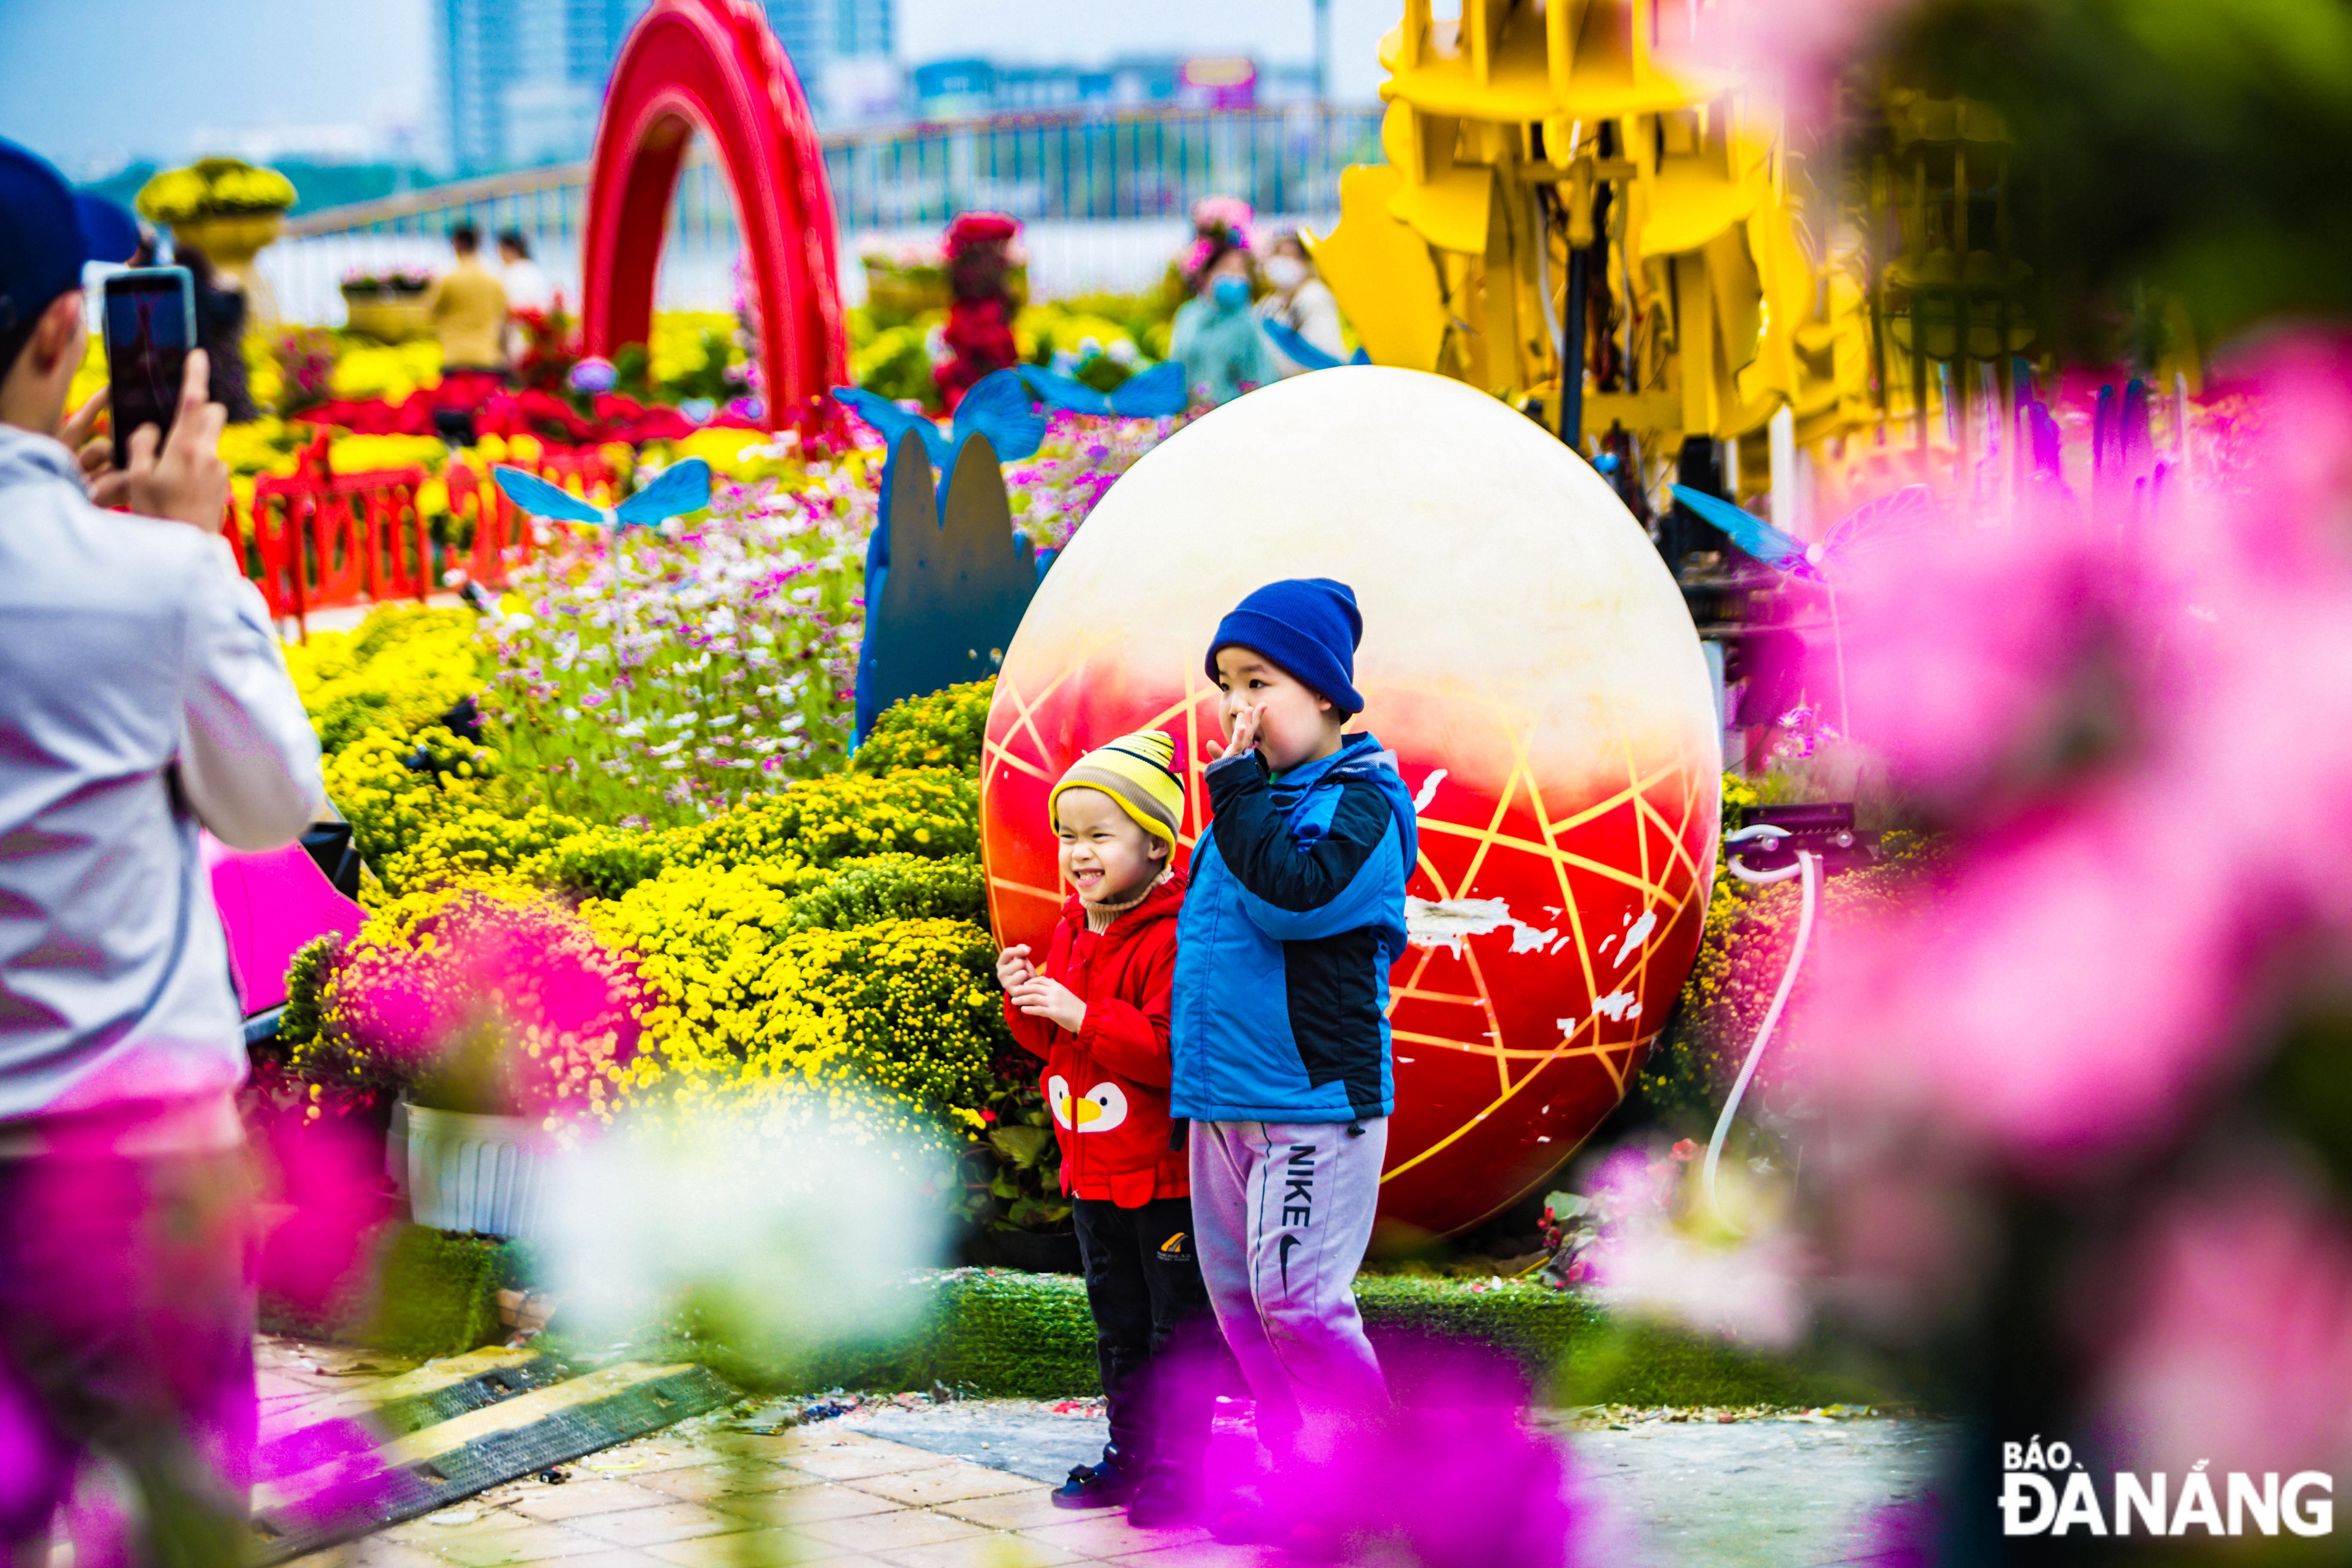 In the cold weather, many parents still take the opportunity to take their children to check-in at flower streets